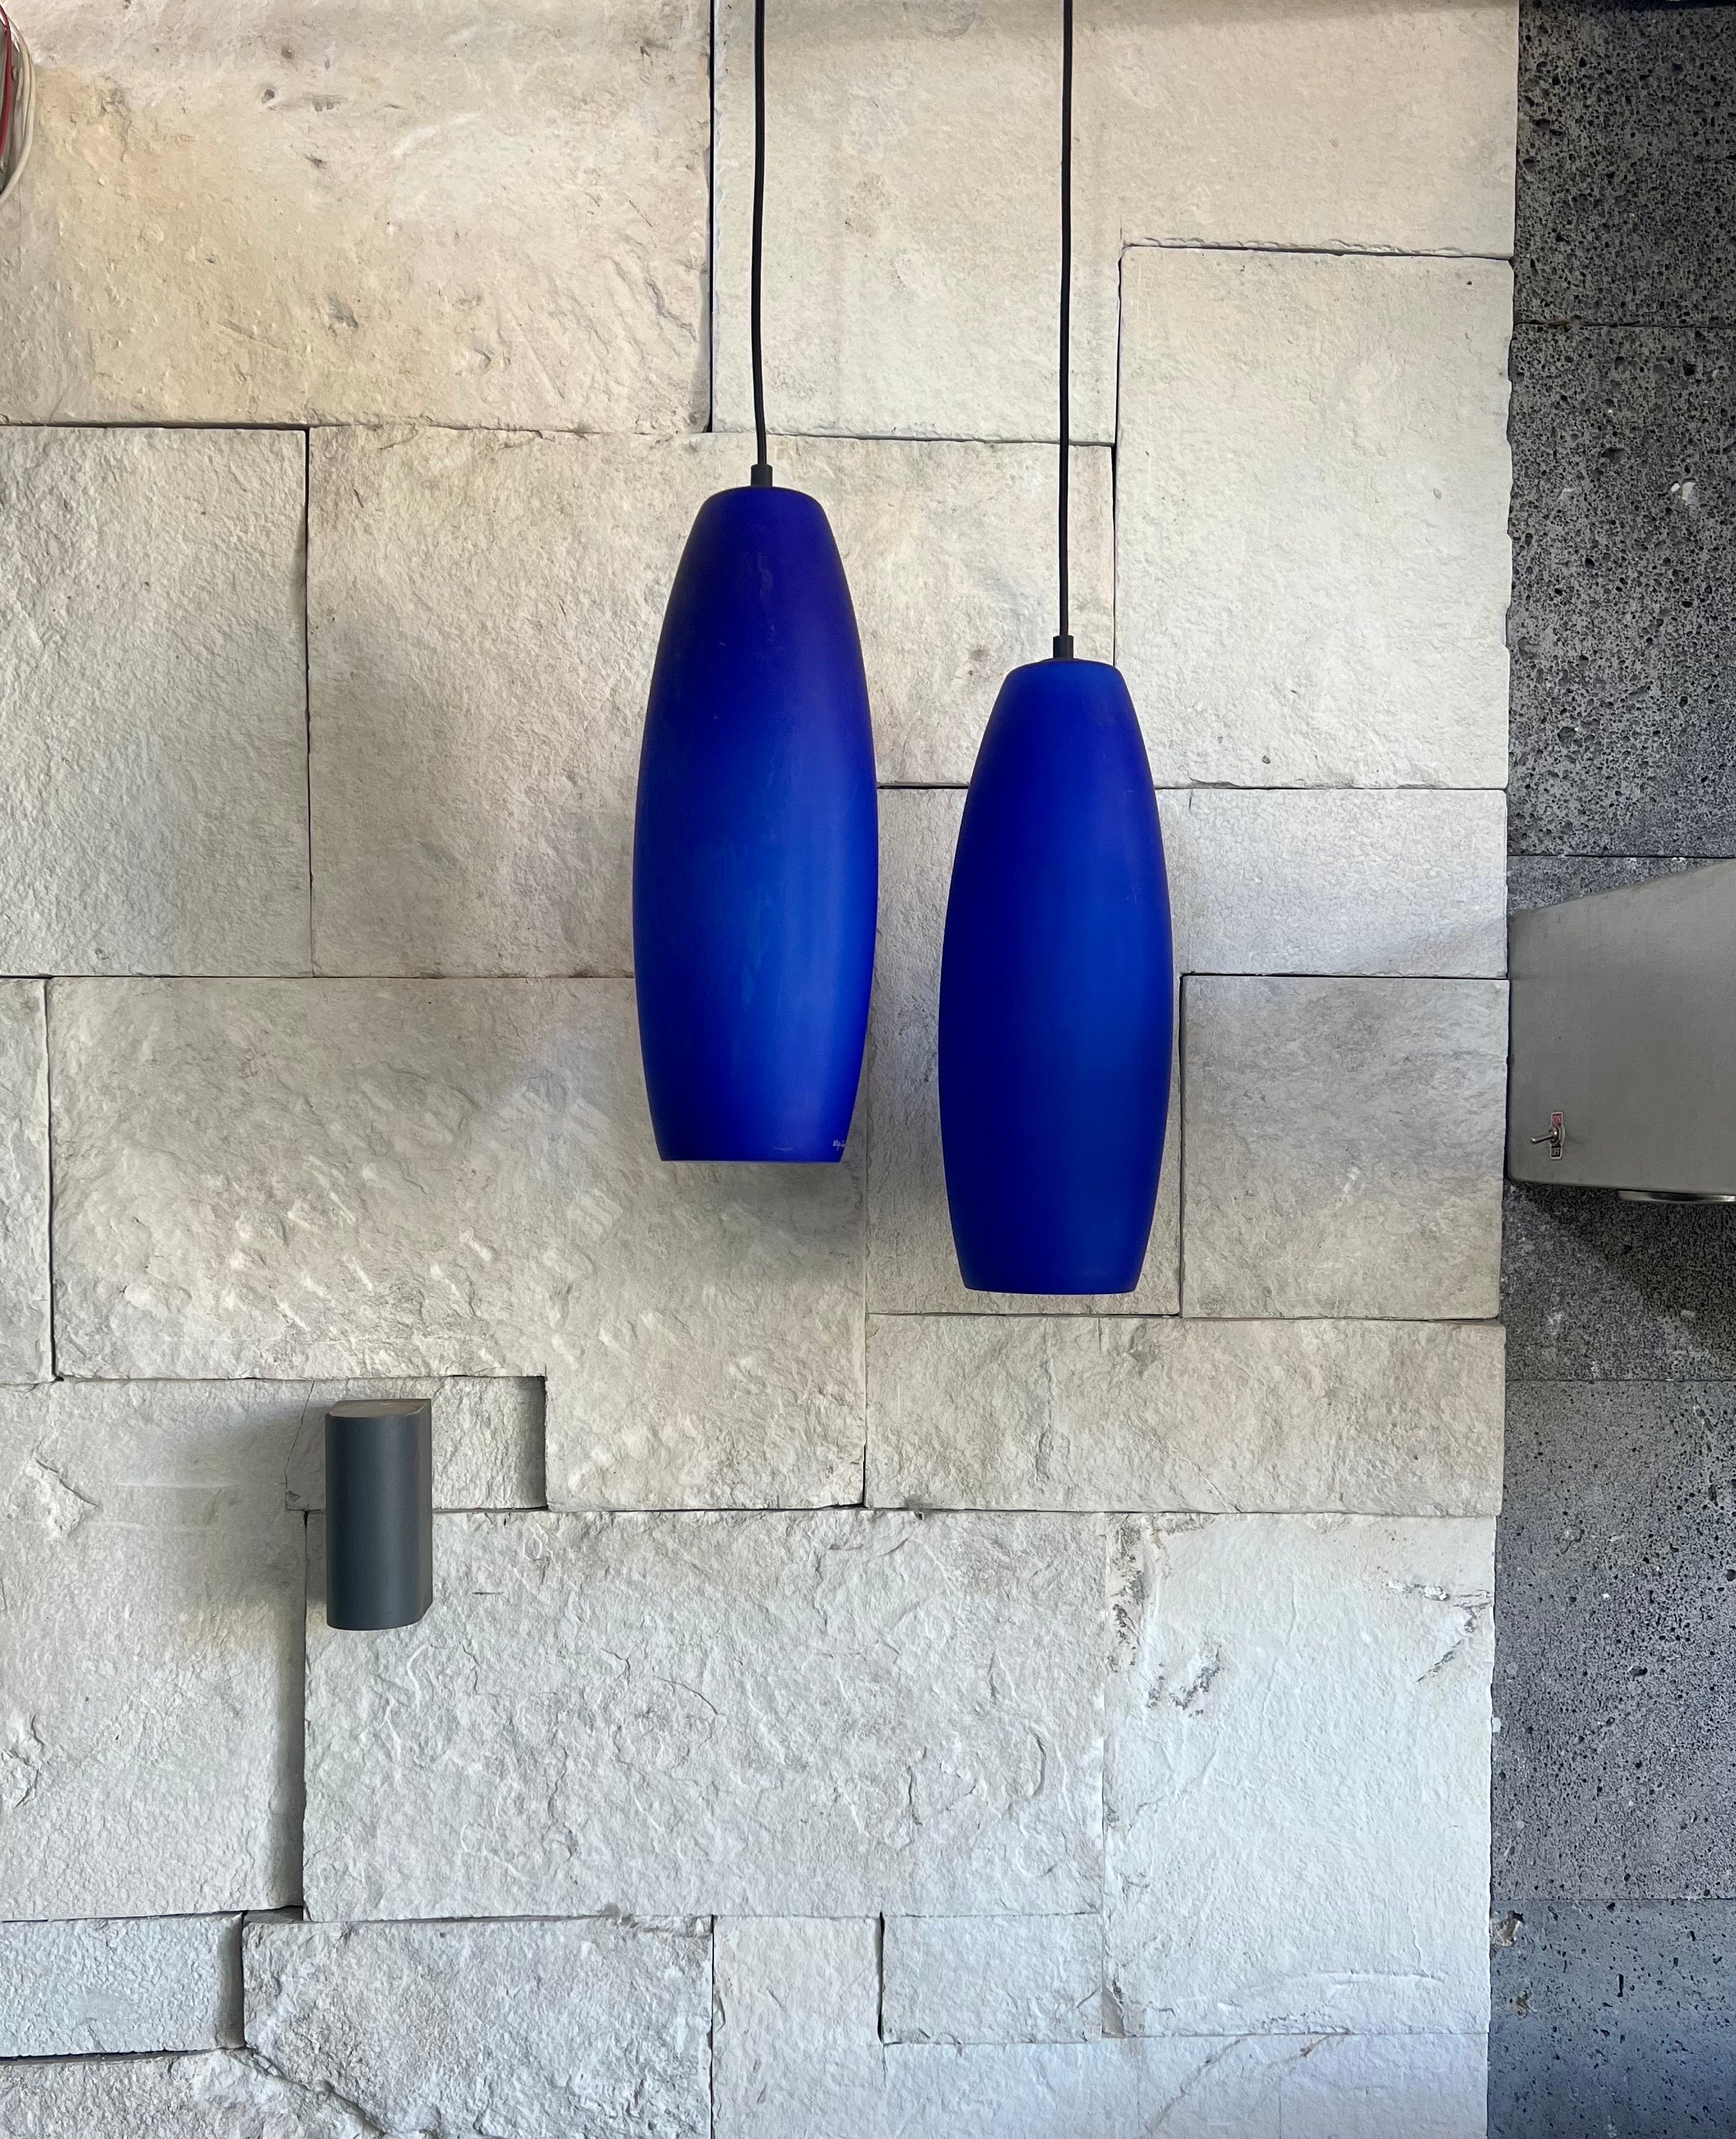 Set of two satin frosted glass pendant lights in blue
Both glasses have a white inside glass layer.
Made in Murano, Italy, in the early 70s, by De Majo Murano, both pendant are signed with 